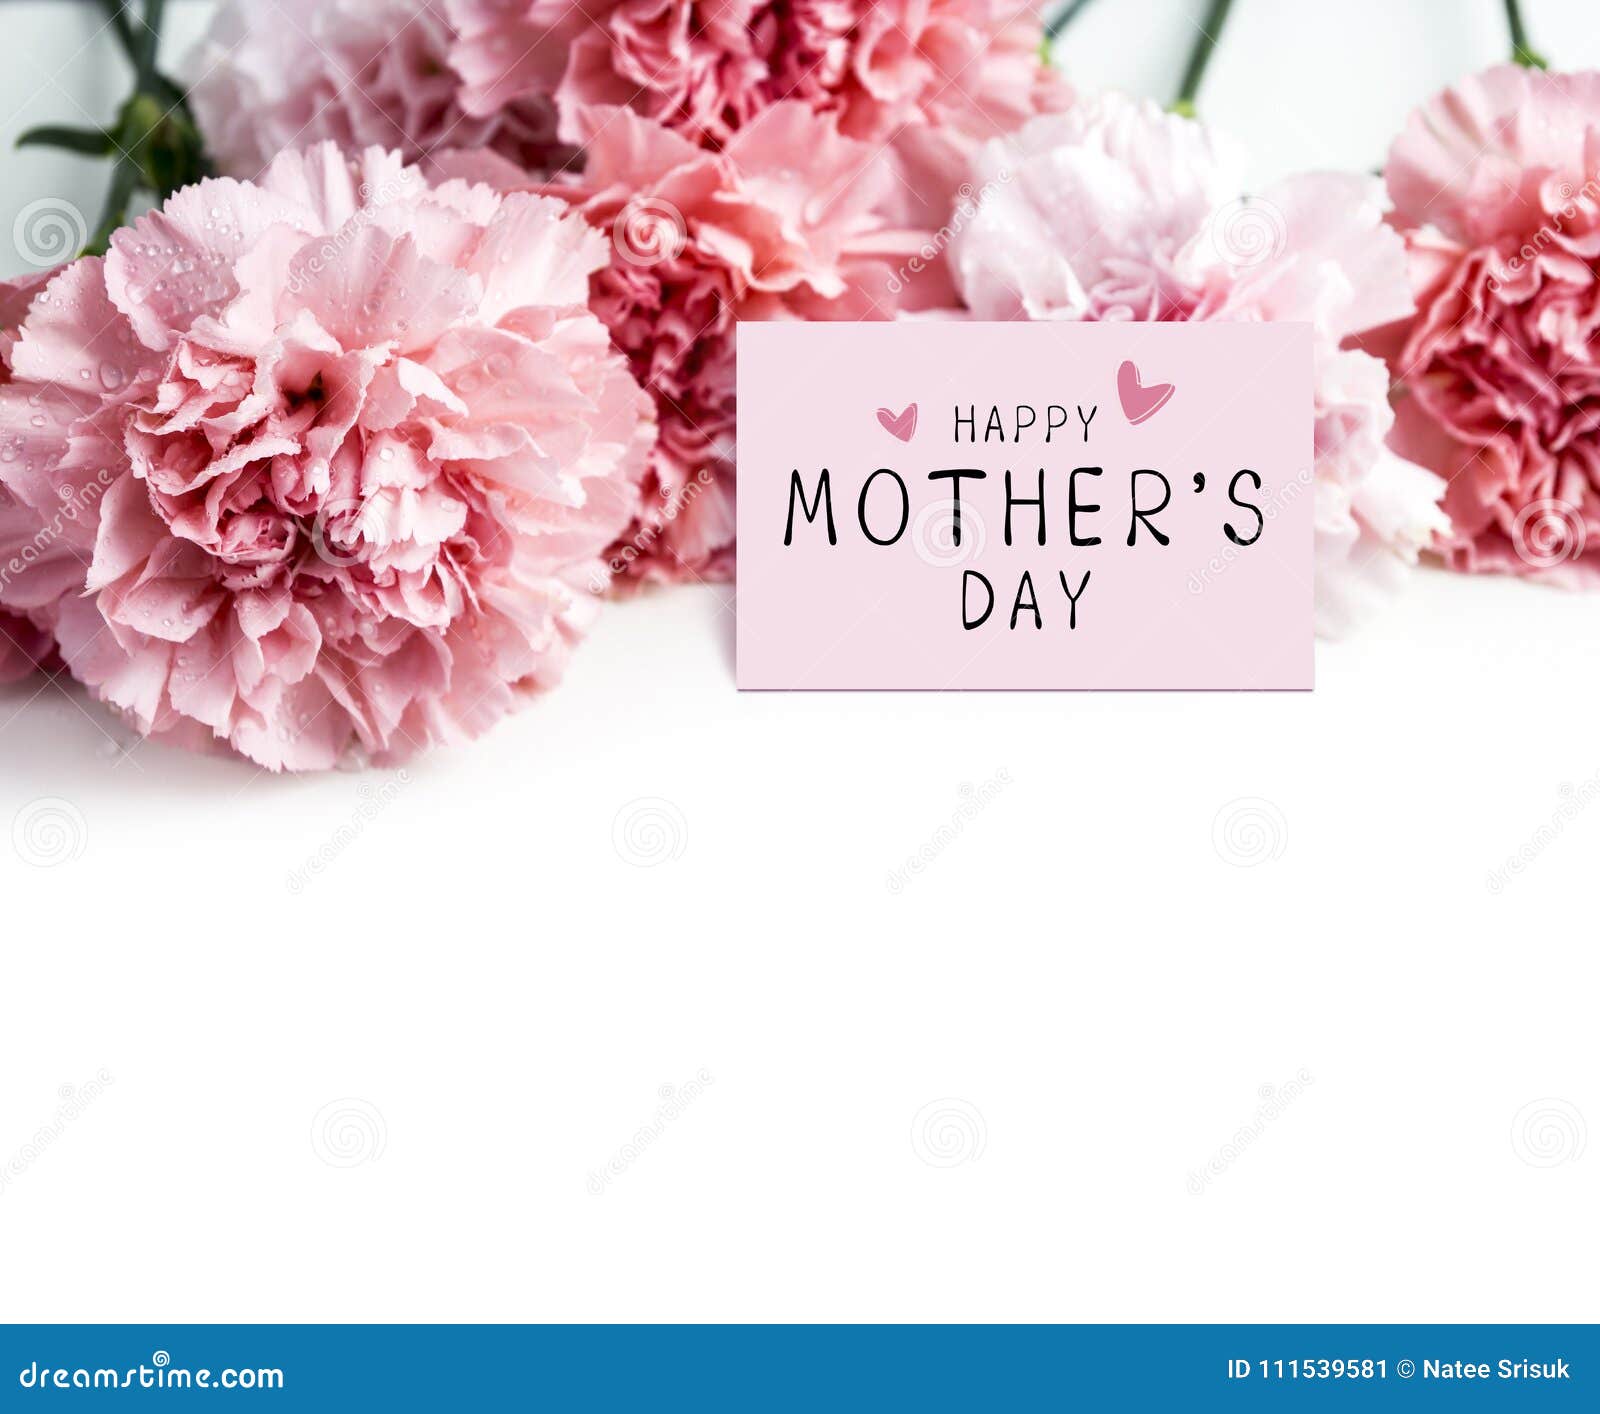 happy mothers day message on paper and pink carnation flower